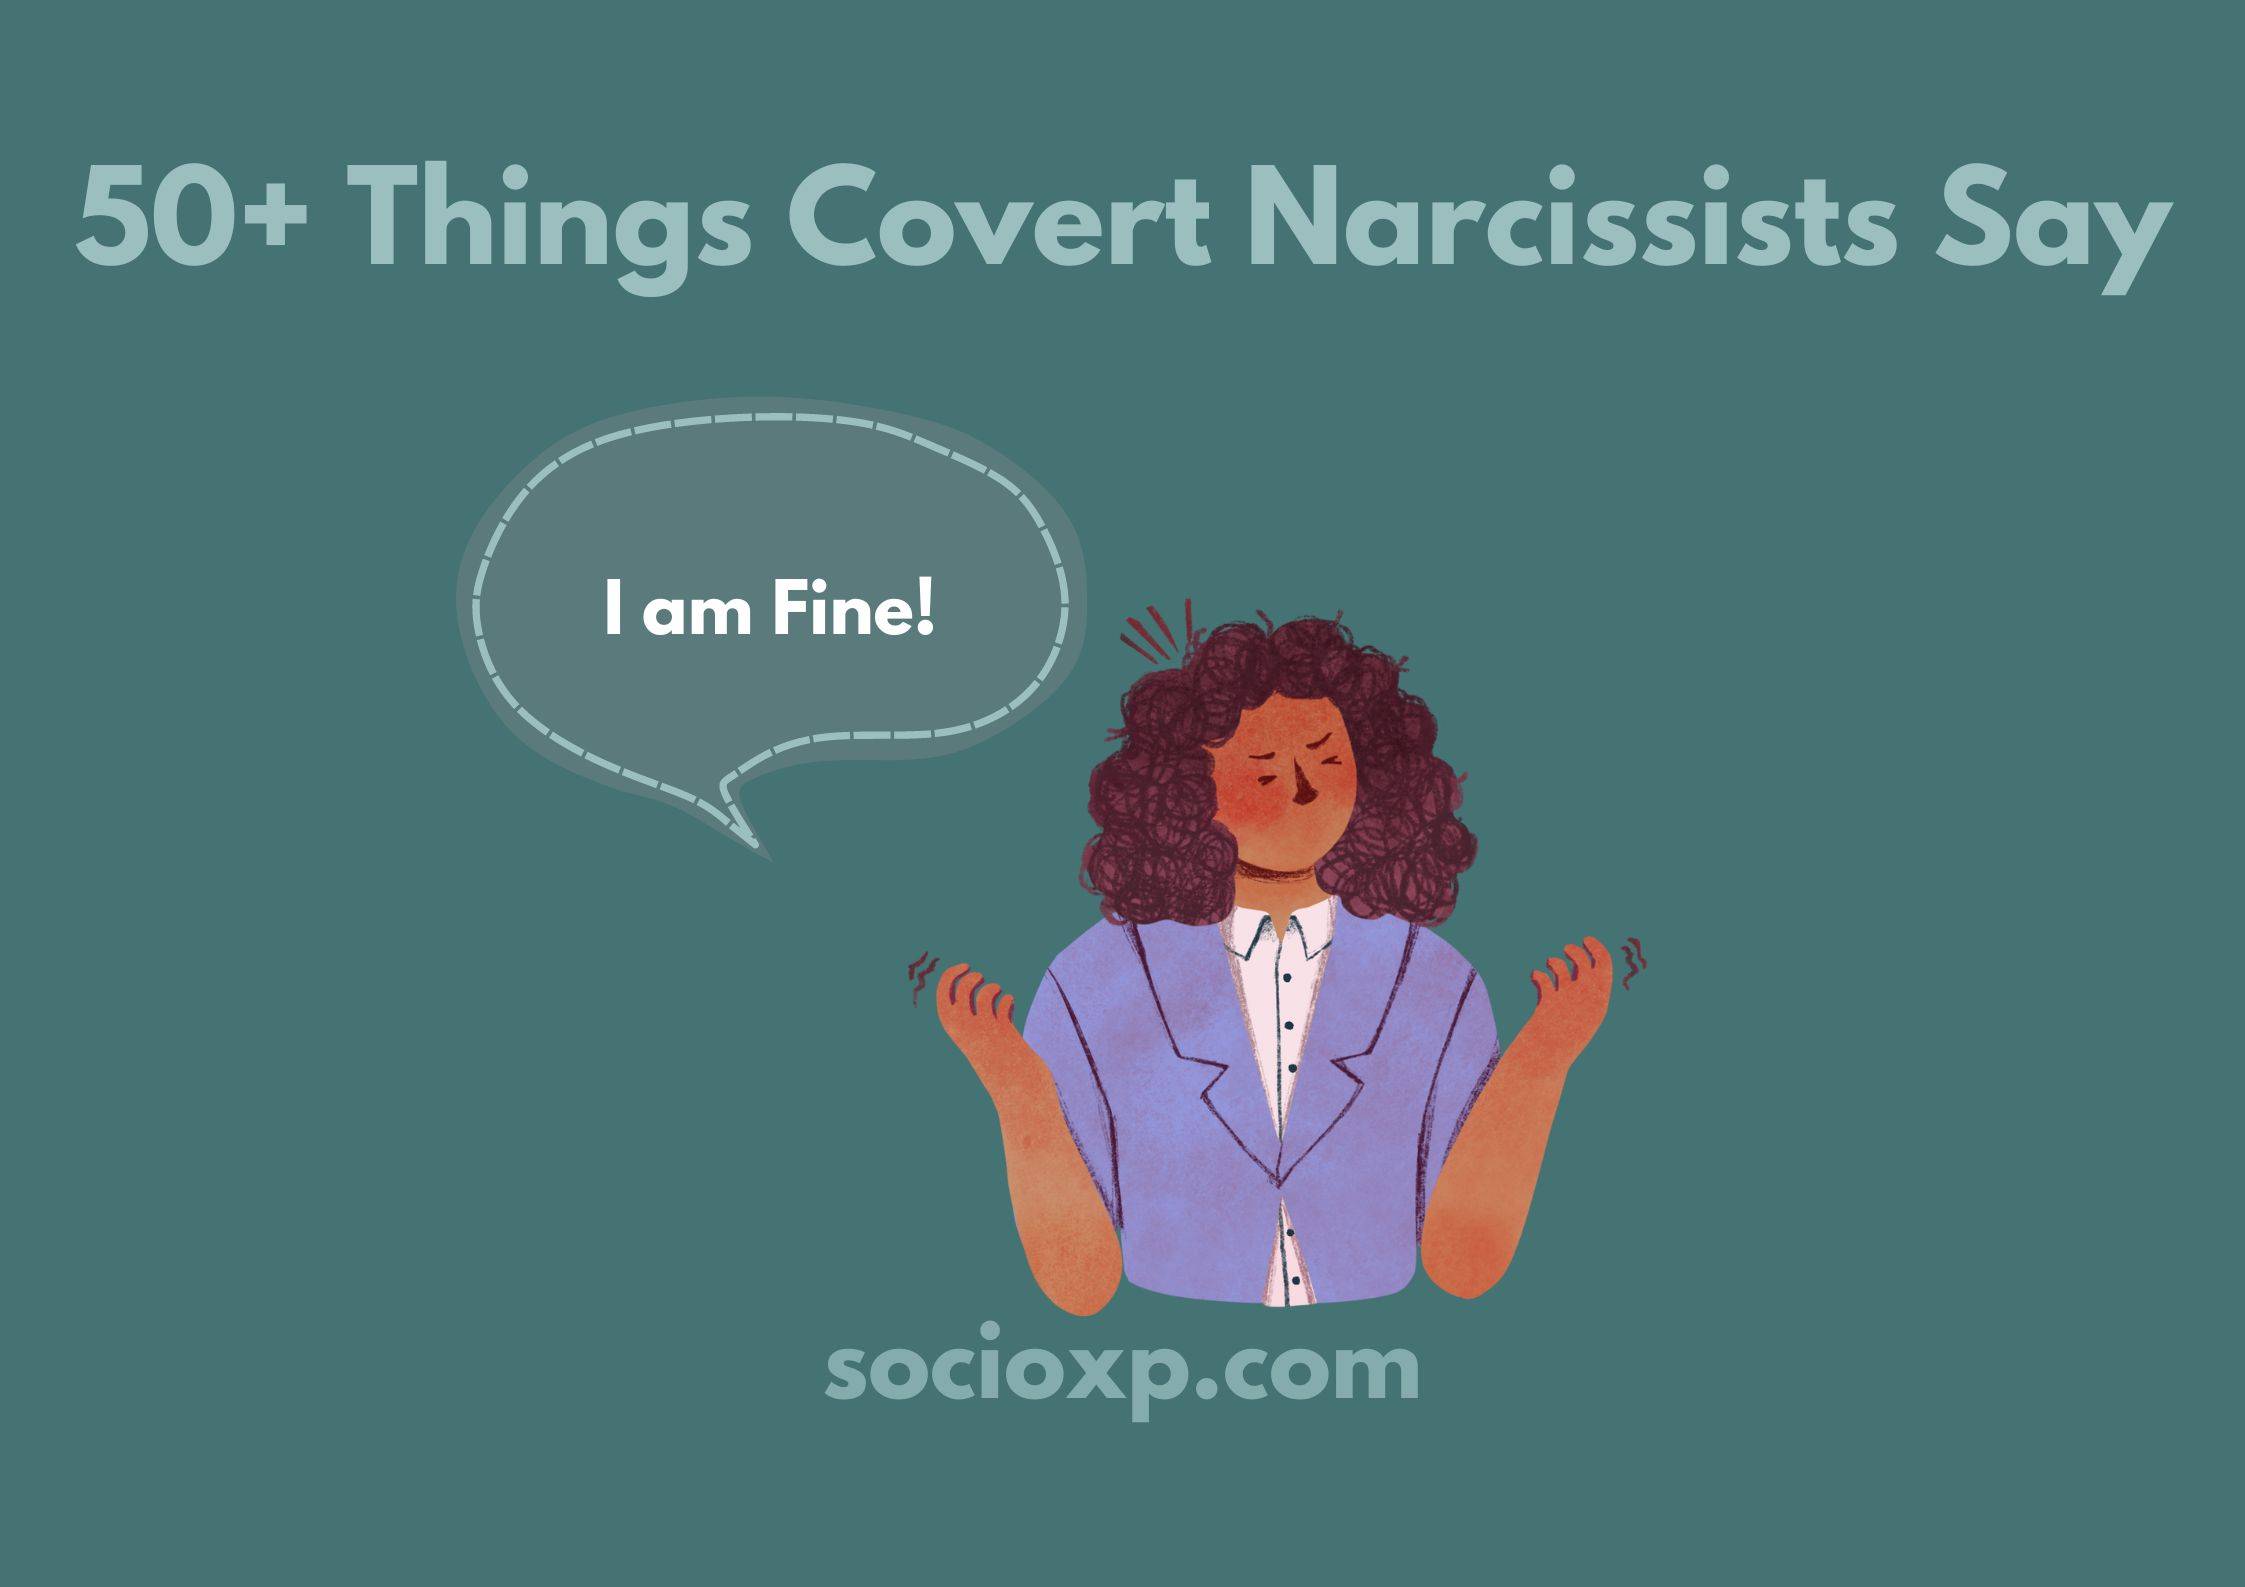 50+ Things Covert Narcissists Say